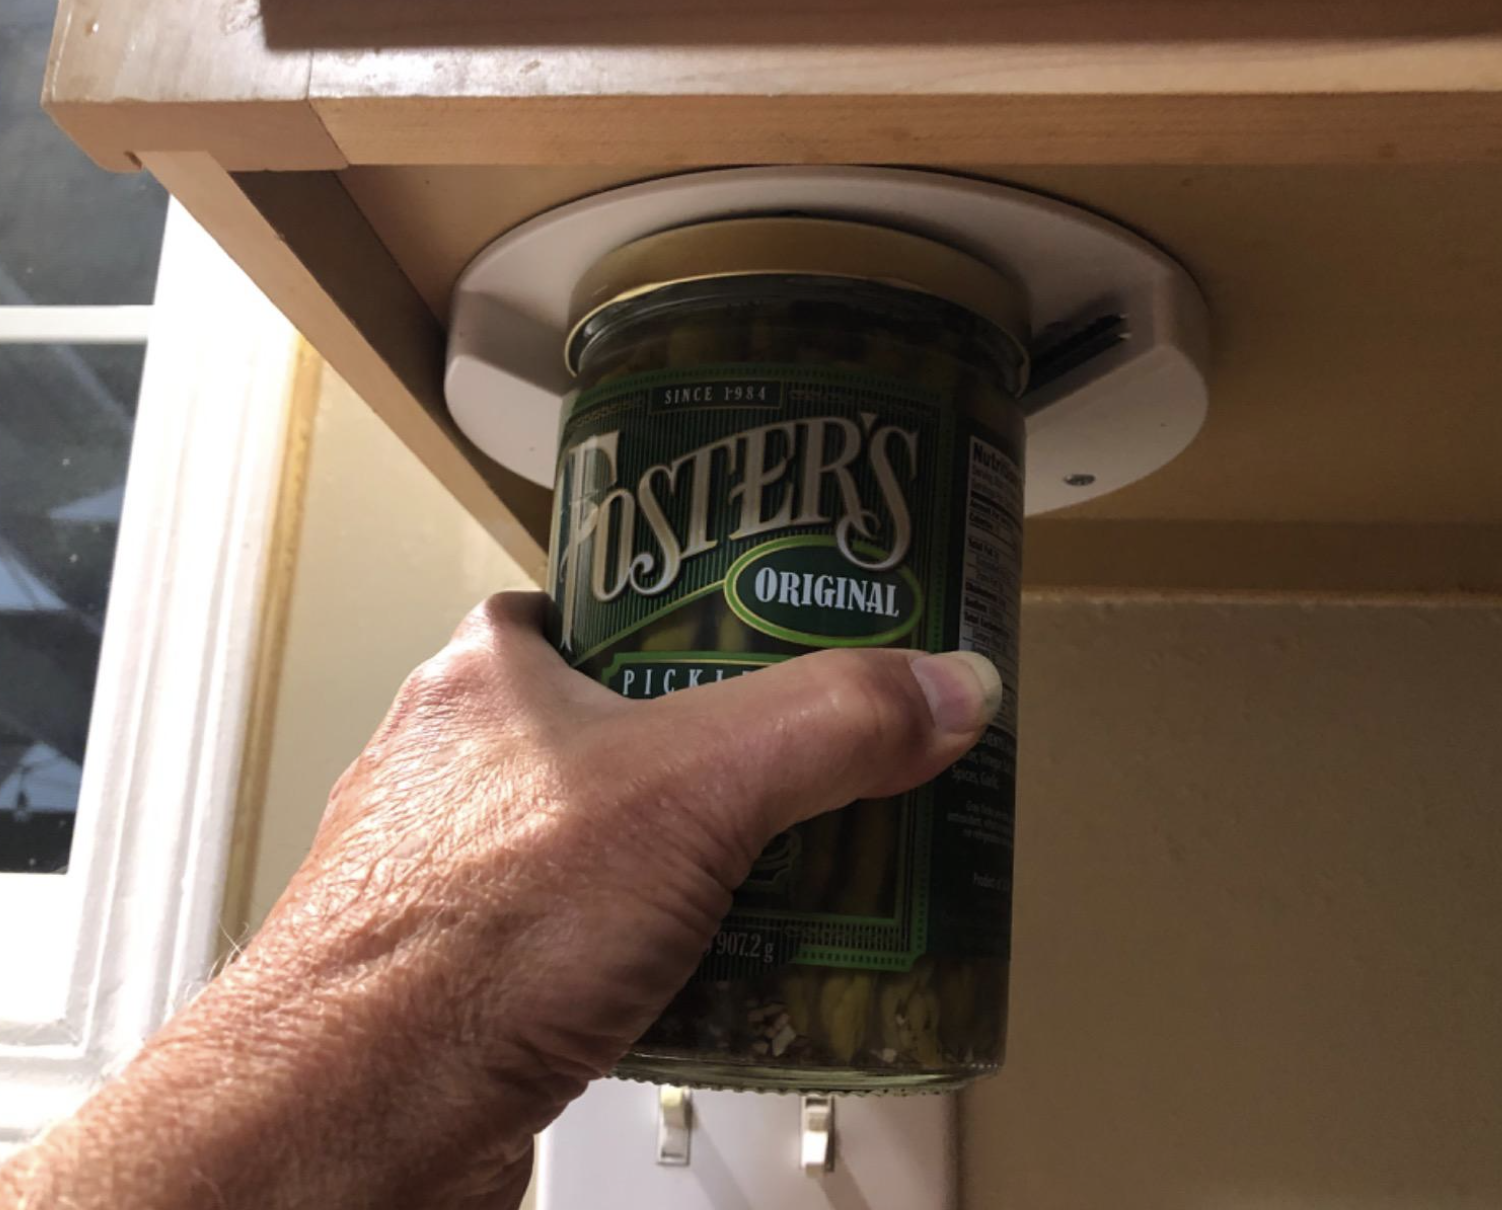 A customer review photo of them opening a jar under their cabinet